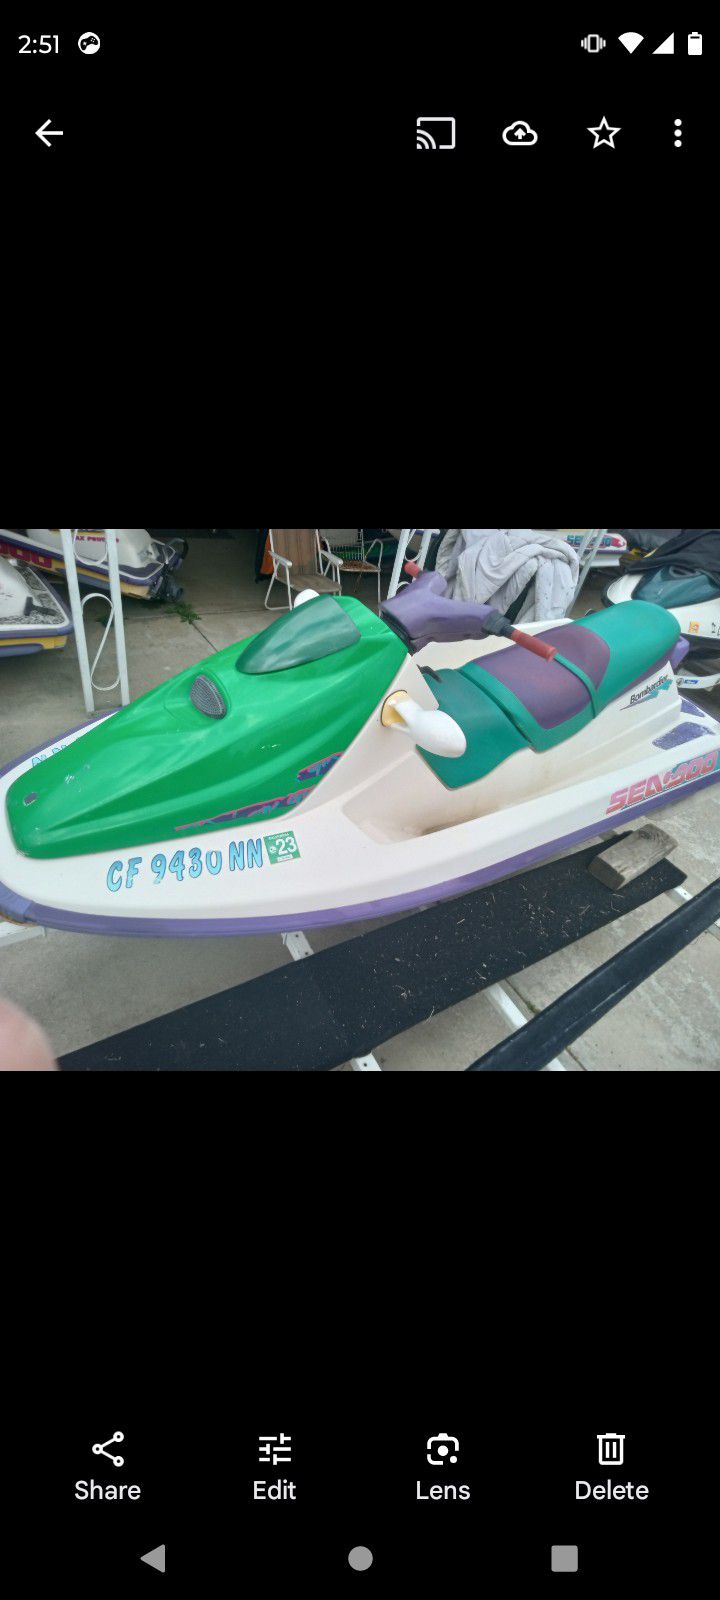 SEADOO GTX WITH FRESH DONOR  MOTOR LOW HOURS INSTALL NO TRAILER INCLUDED 